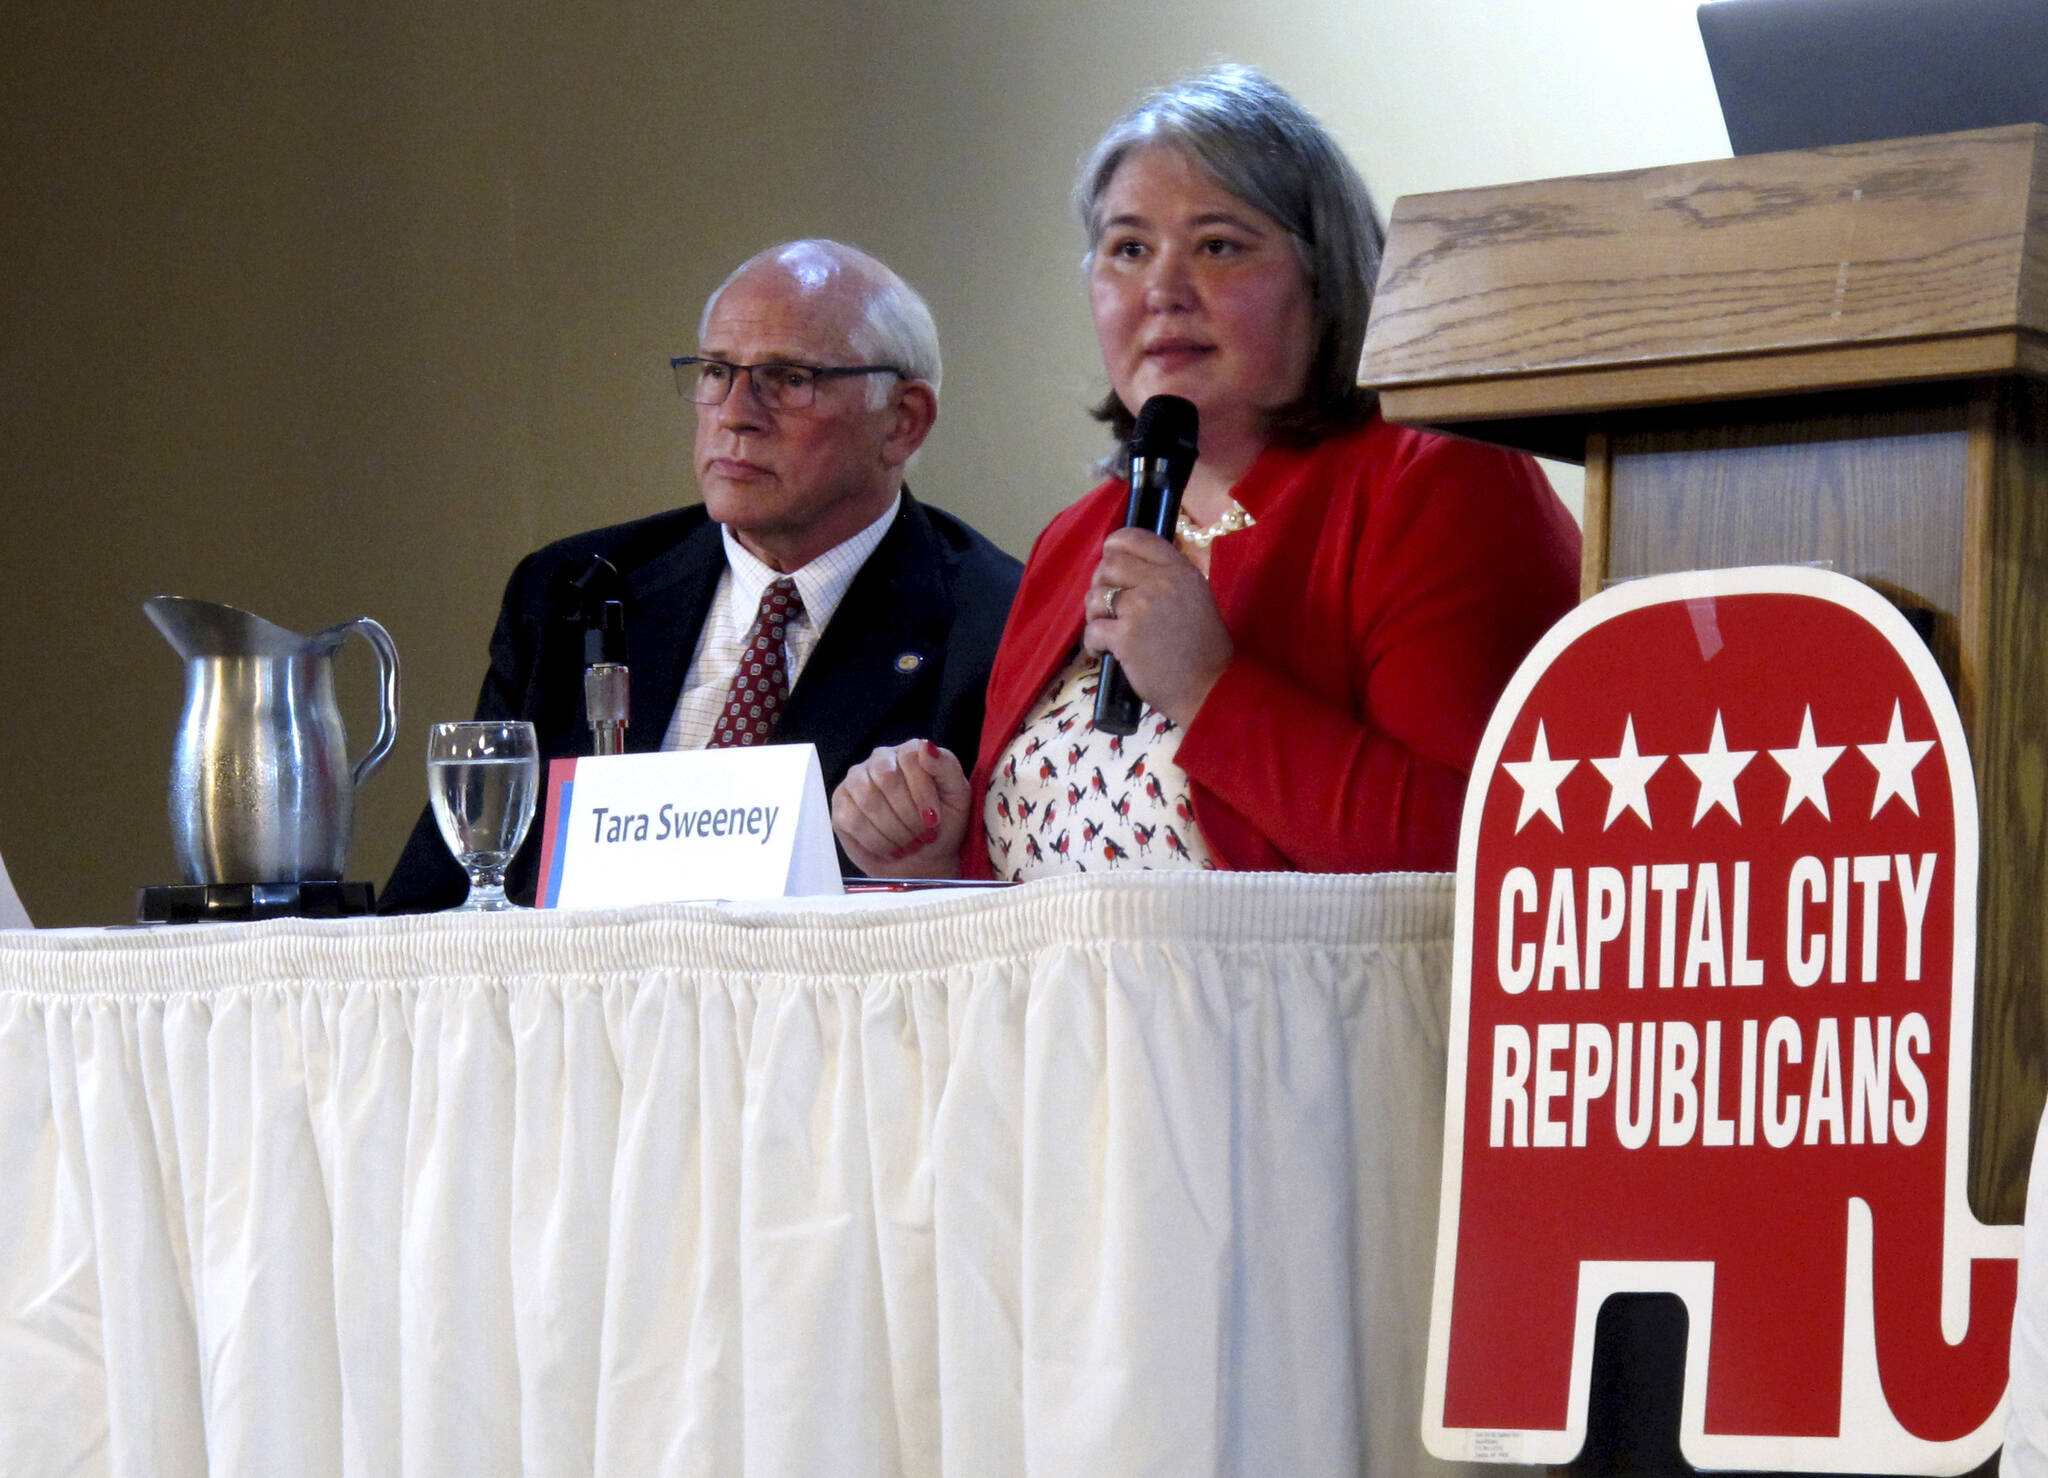 Republican Tara Sweeney, right, speaks Monday, May 16, 2022, at a forum in Juneau, Alaska, that was also attended by three other Republican candidates for Alaska’s U.S. House seat, including John Coghill, left. Sweeney and Coghill are among 48 candidates in a June 11 special primary for the House seat left vacant by the death earlier this year of Republican Rep. Don Young. (AP Photo / Becky Bohrer)